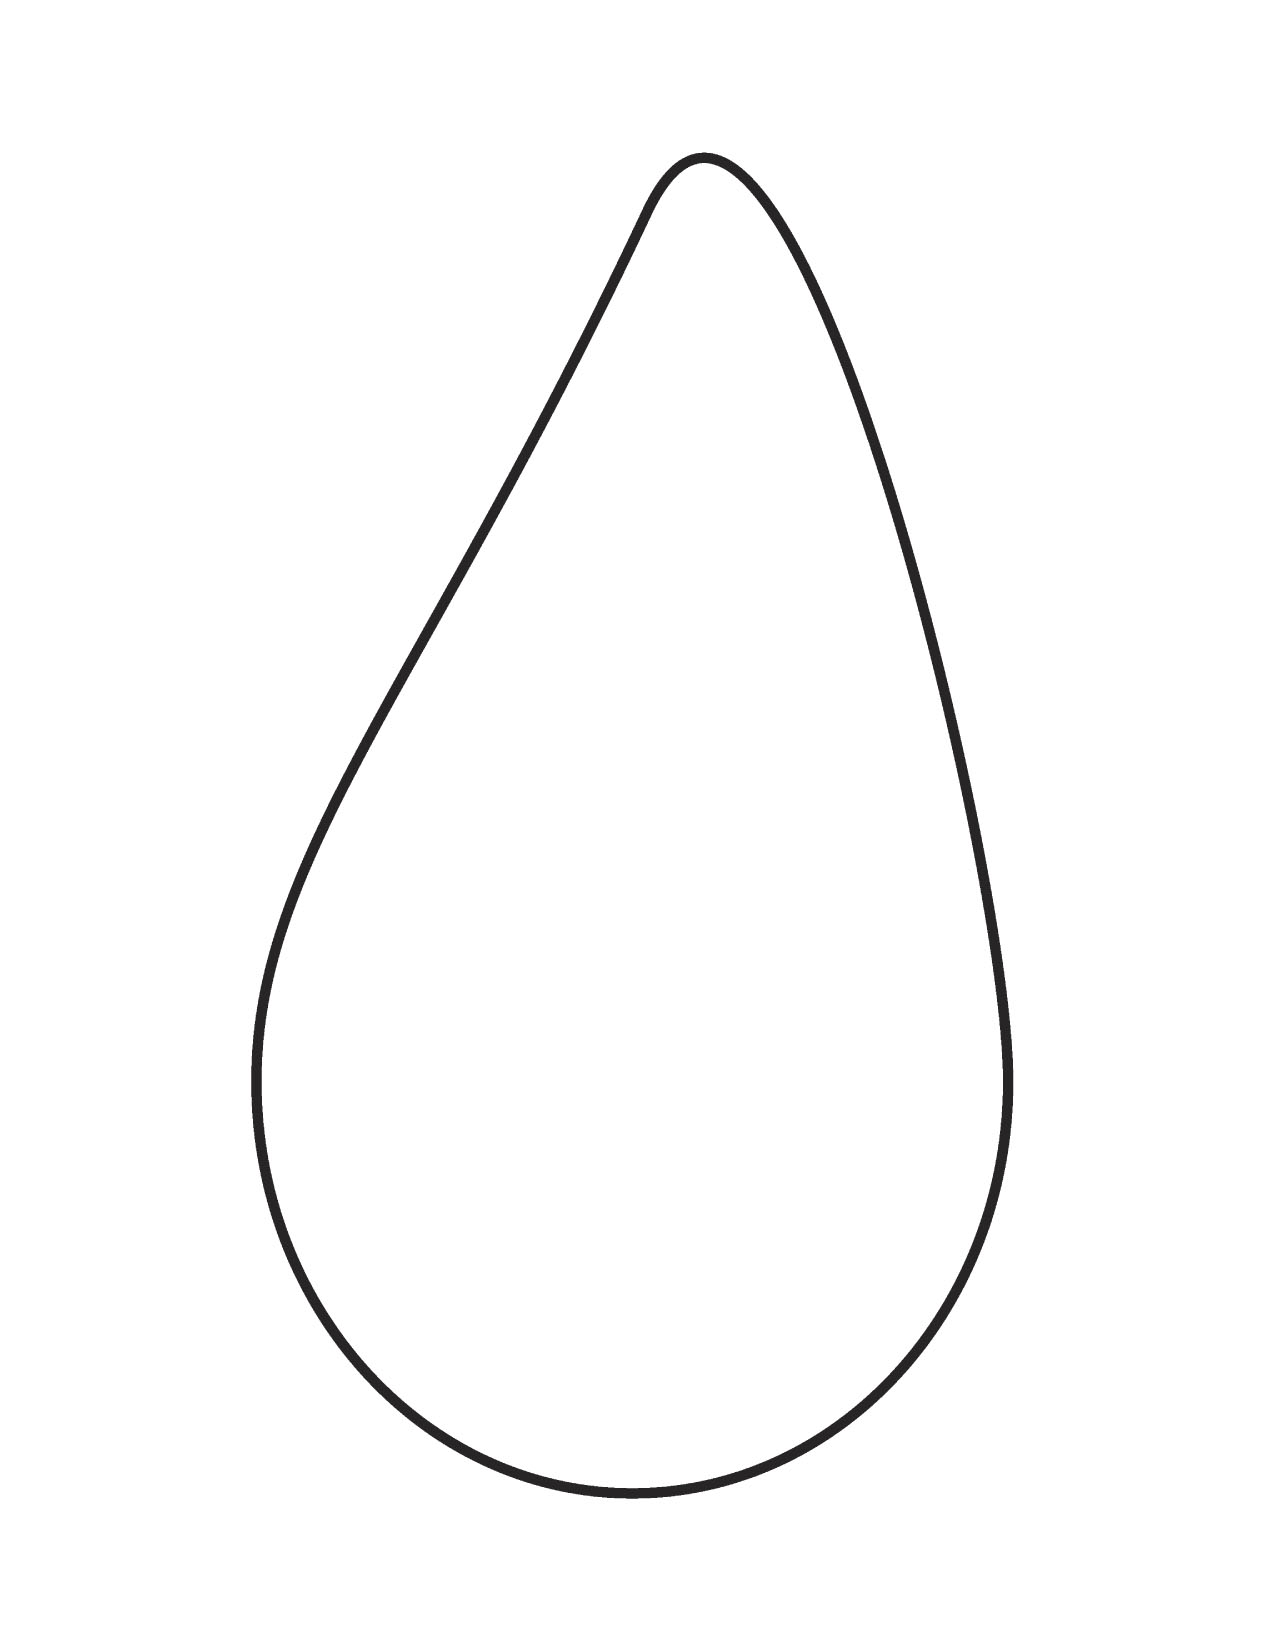 Raindrop Template Printable Cliparts co